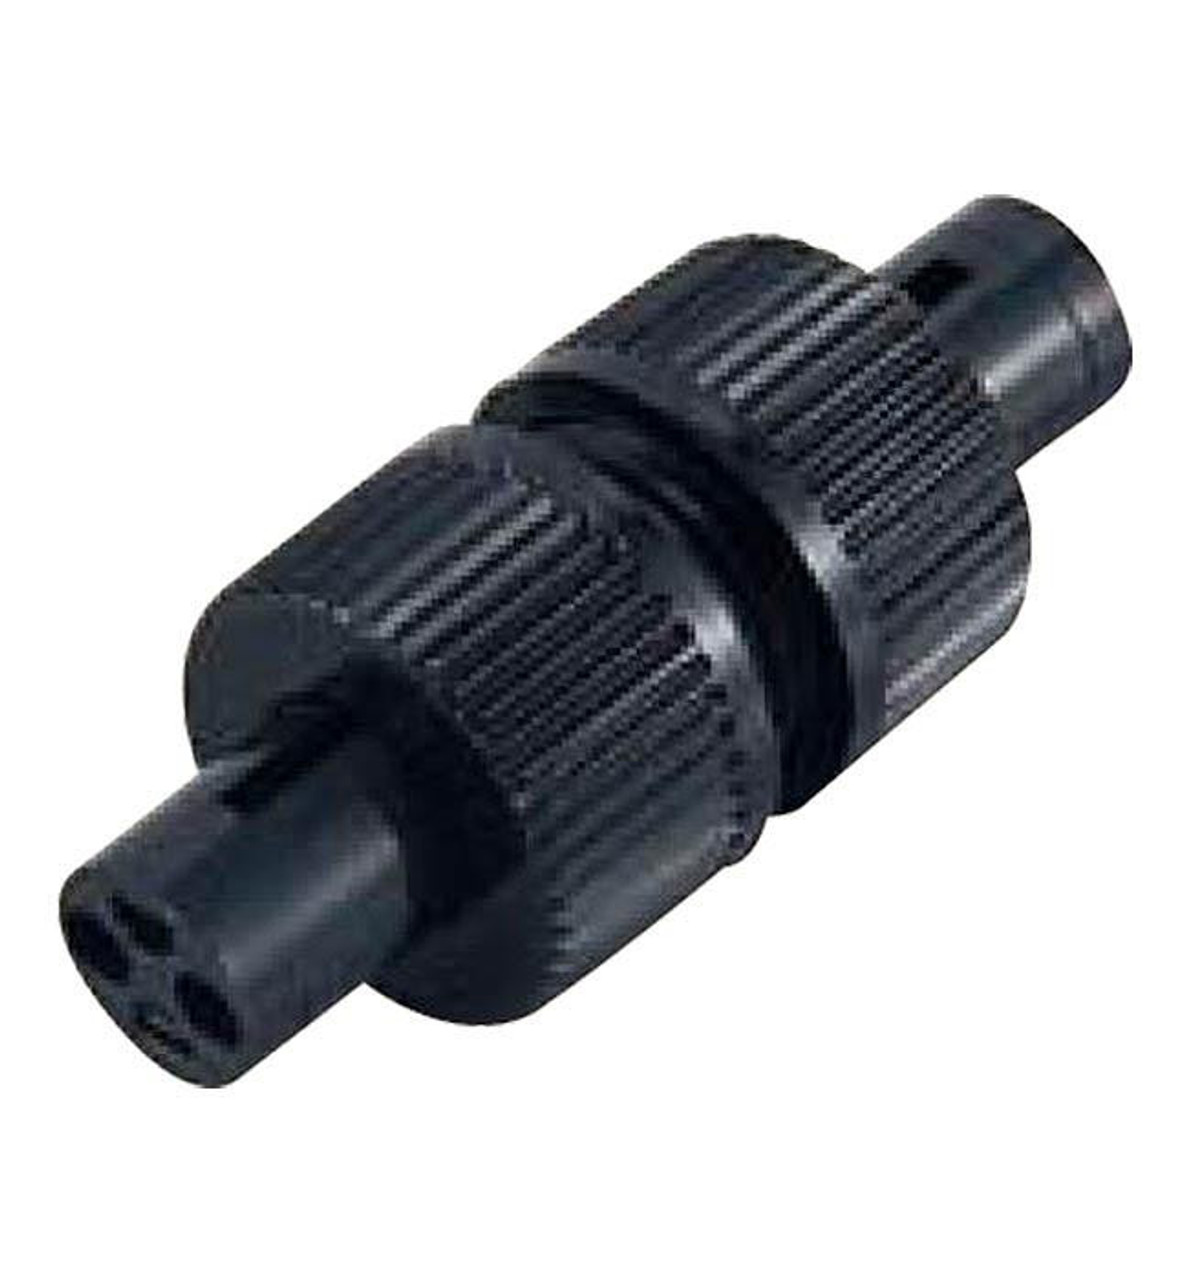 Fiber Optic Cable Connector, Joint Adapter, 2.2mm Dia Cuttable Cables